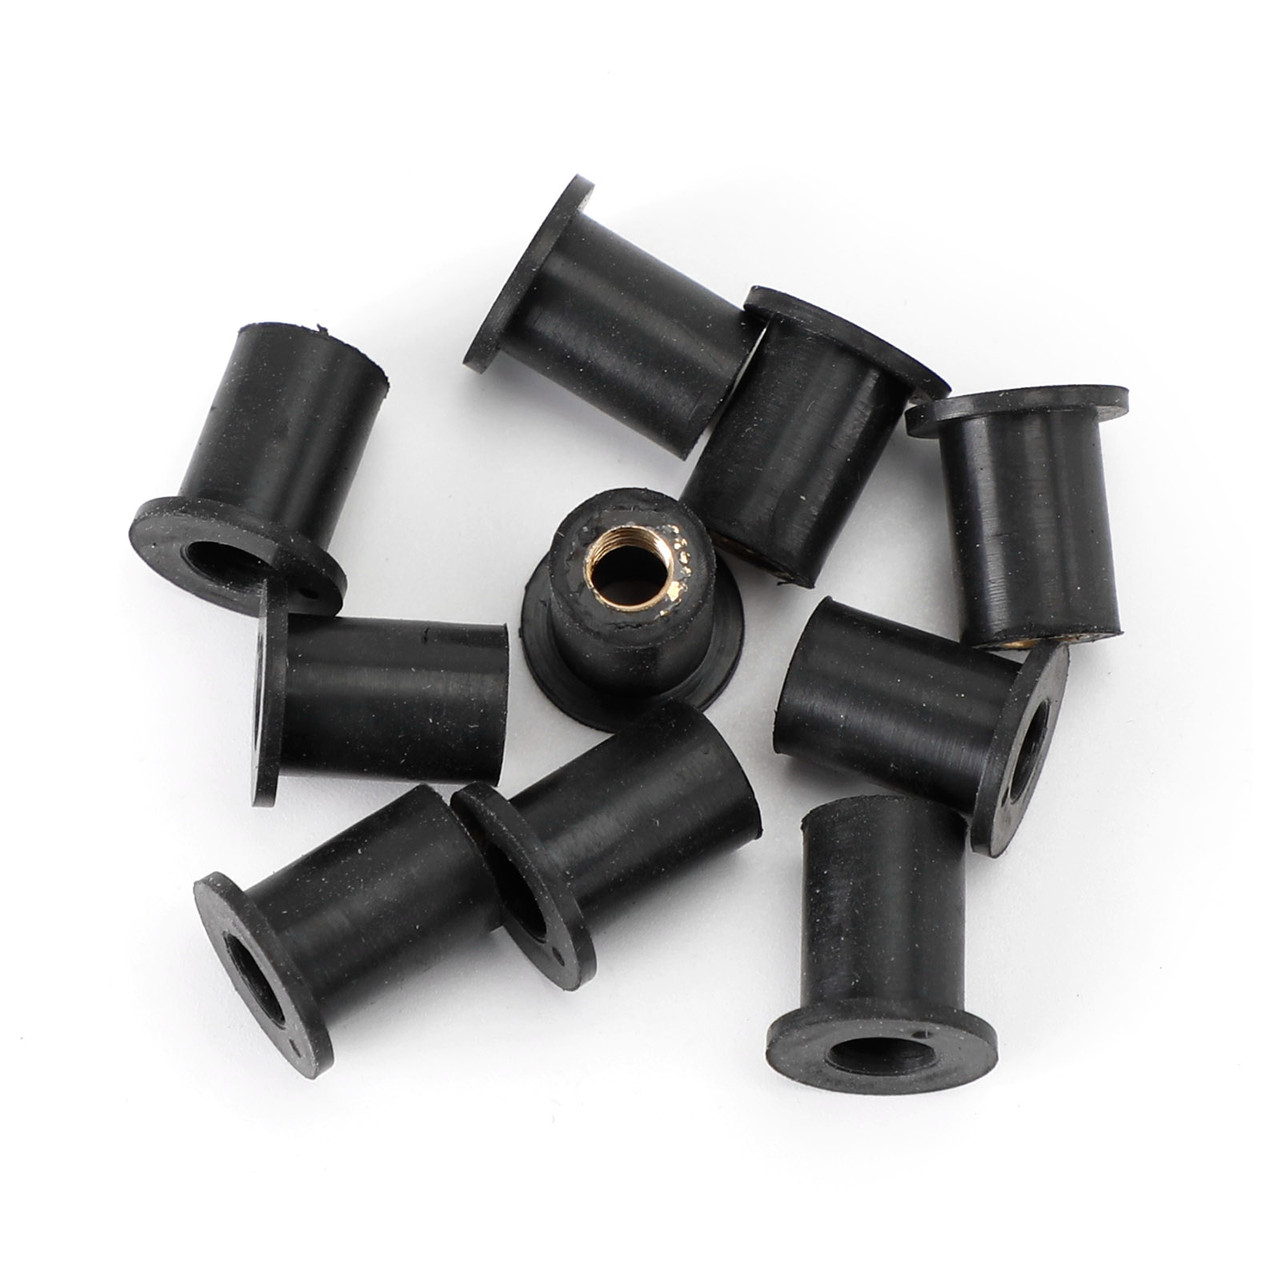 10pcs M5 Rubber Well Nuts Wellnuts for Fairing & Screen Fixing Pack of 10 - 10mm Hole